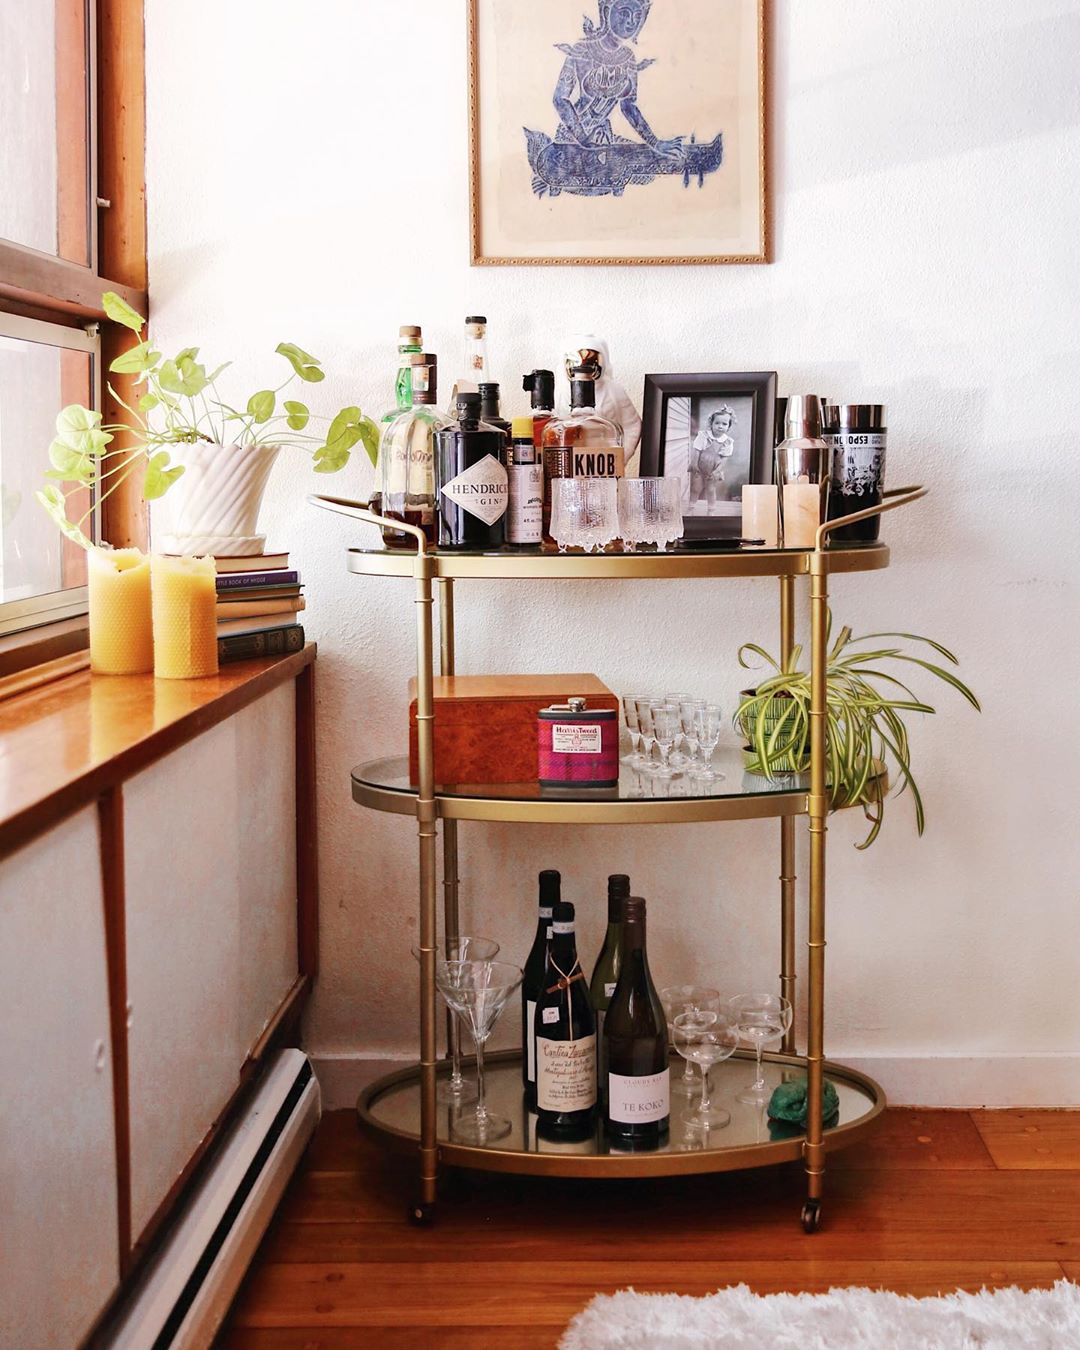 brass bar cart filled with liquor and nice glasses photo by Instagram user @venturetravelist